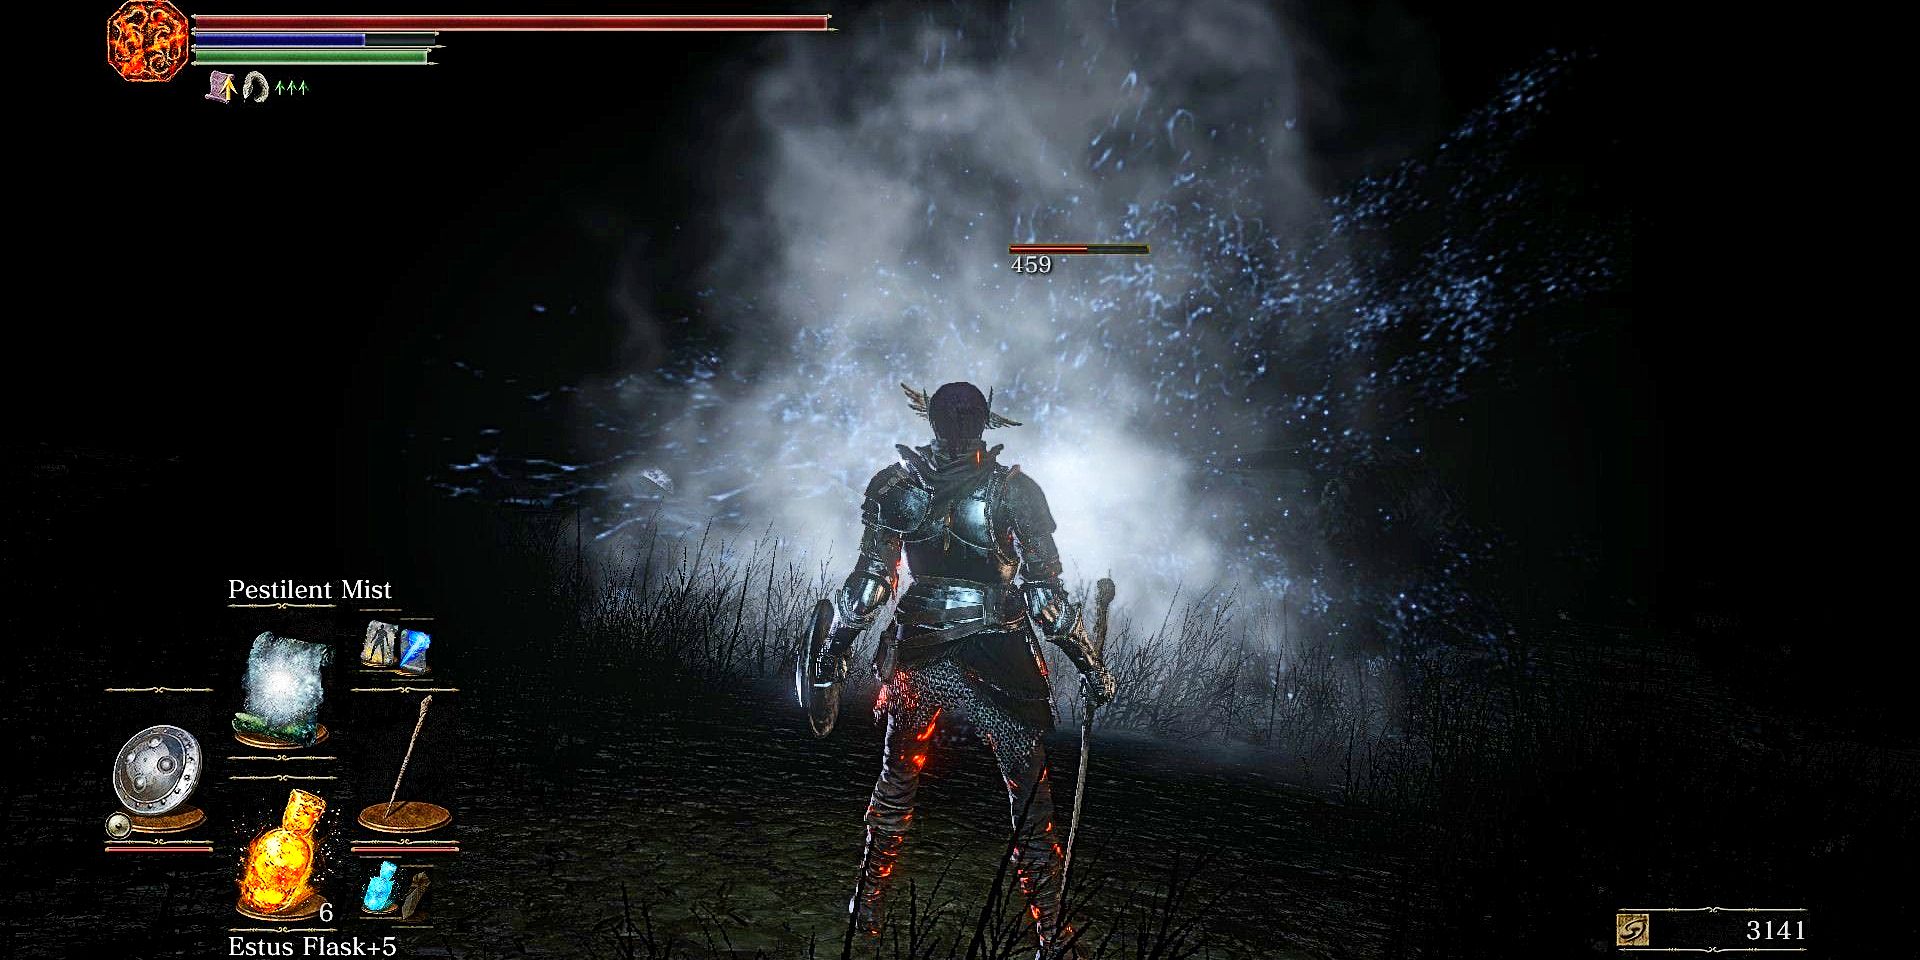 player getting revenge on high lord wolnir with their own cloud of deadly vapors.